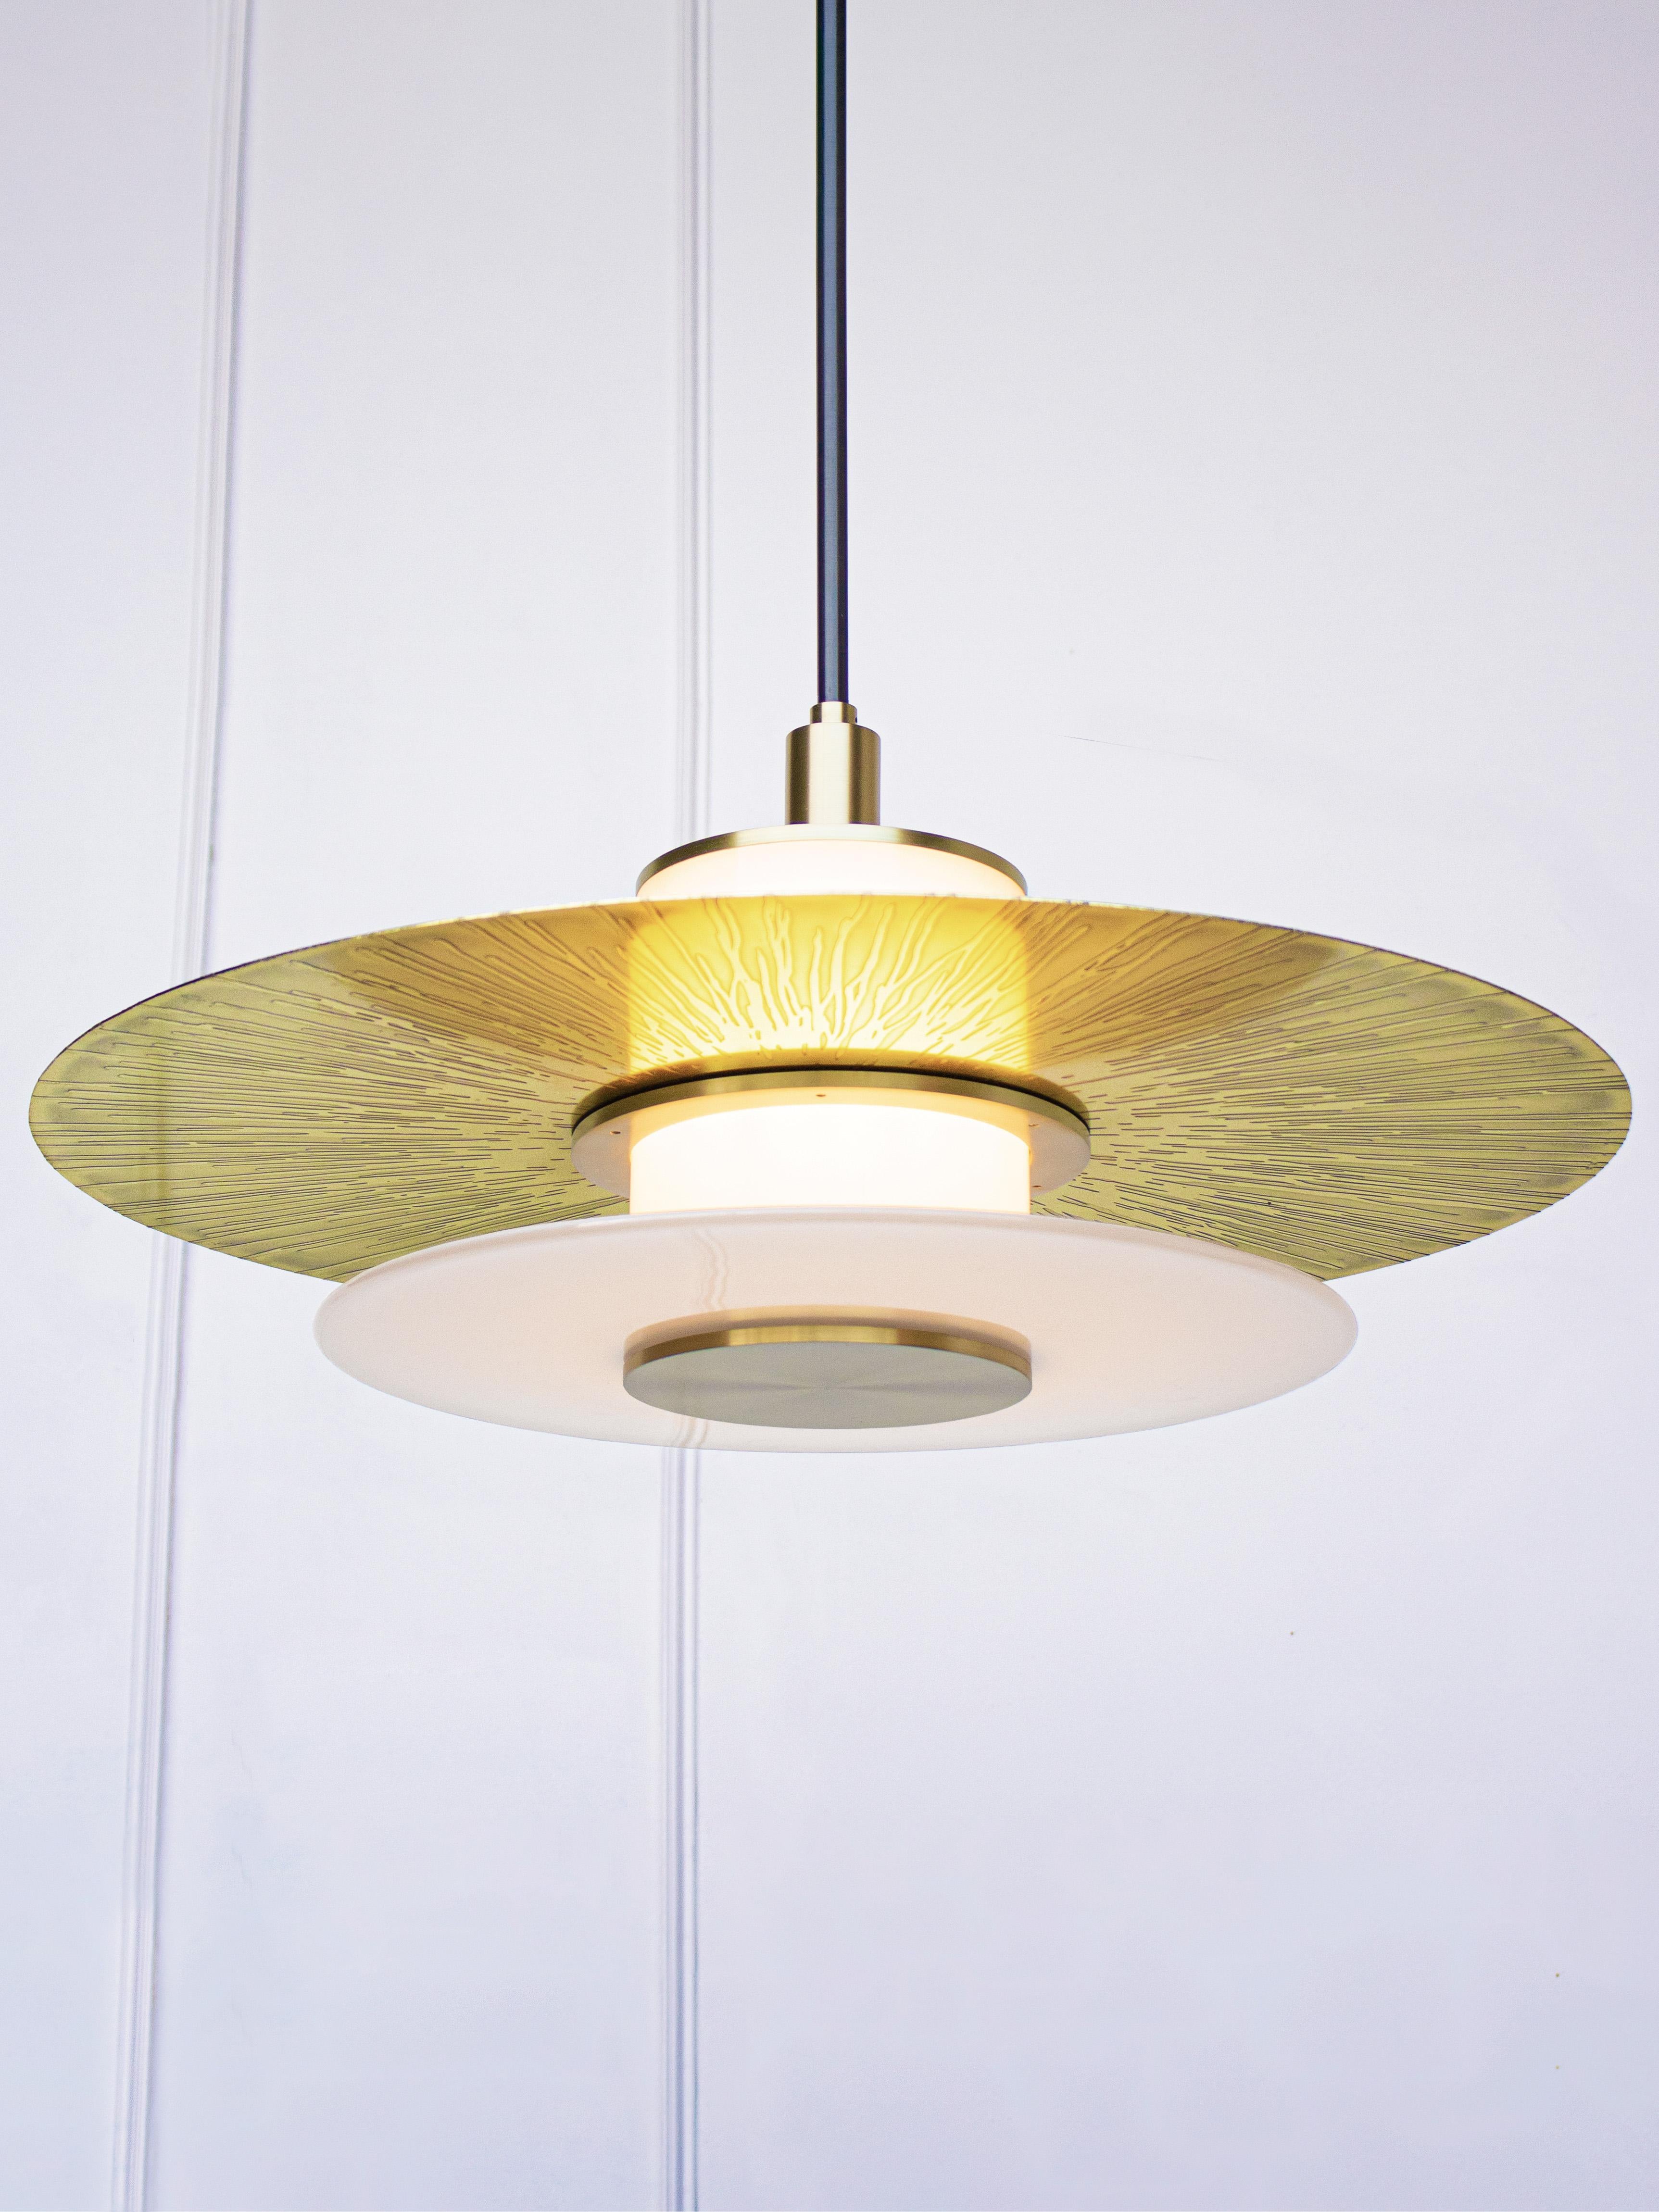 At 24 inches in diameter the Klein Pendant embraces a layered light assembly comprising a hand blown glass rondelle and an etched and polished brass disc. Mounted to a central white light tube, the Klein Pendant offers ample up lighting as well as a